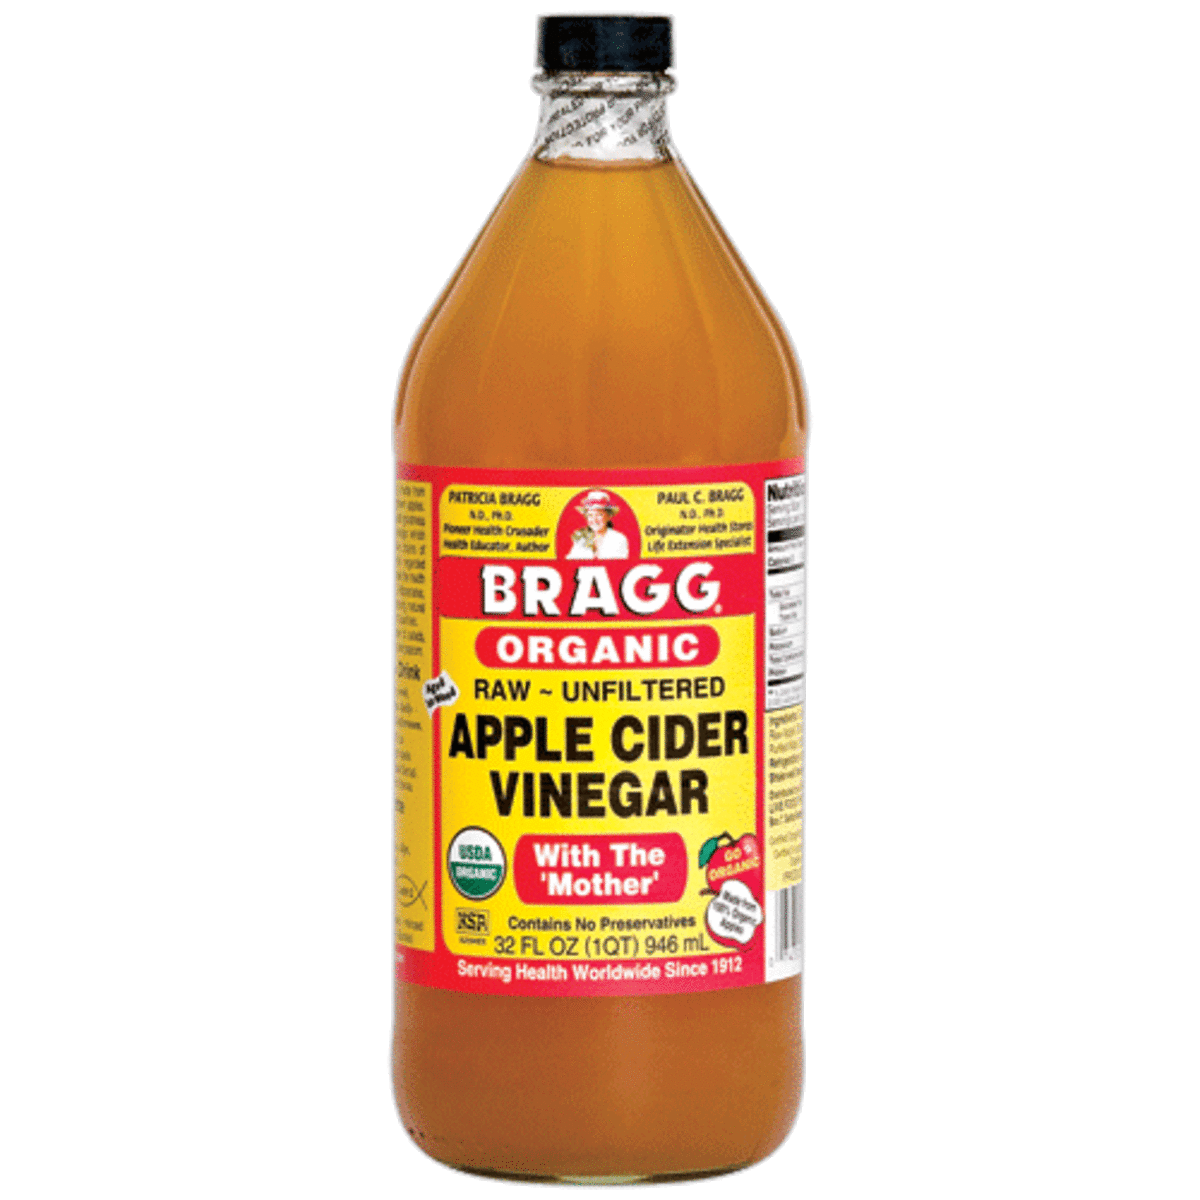 Health Benefits and Uses of Apple Cider Vinegar